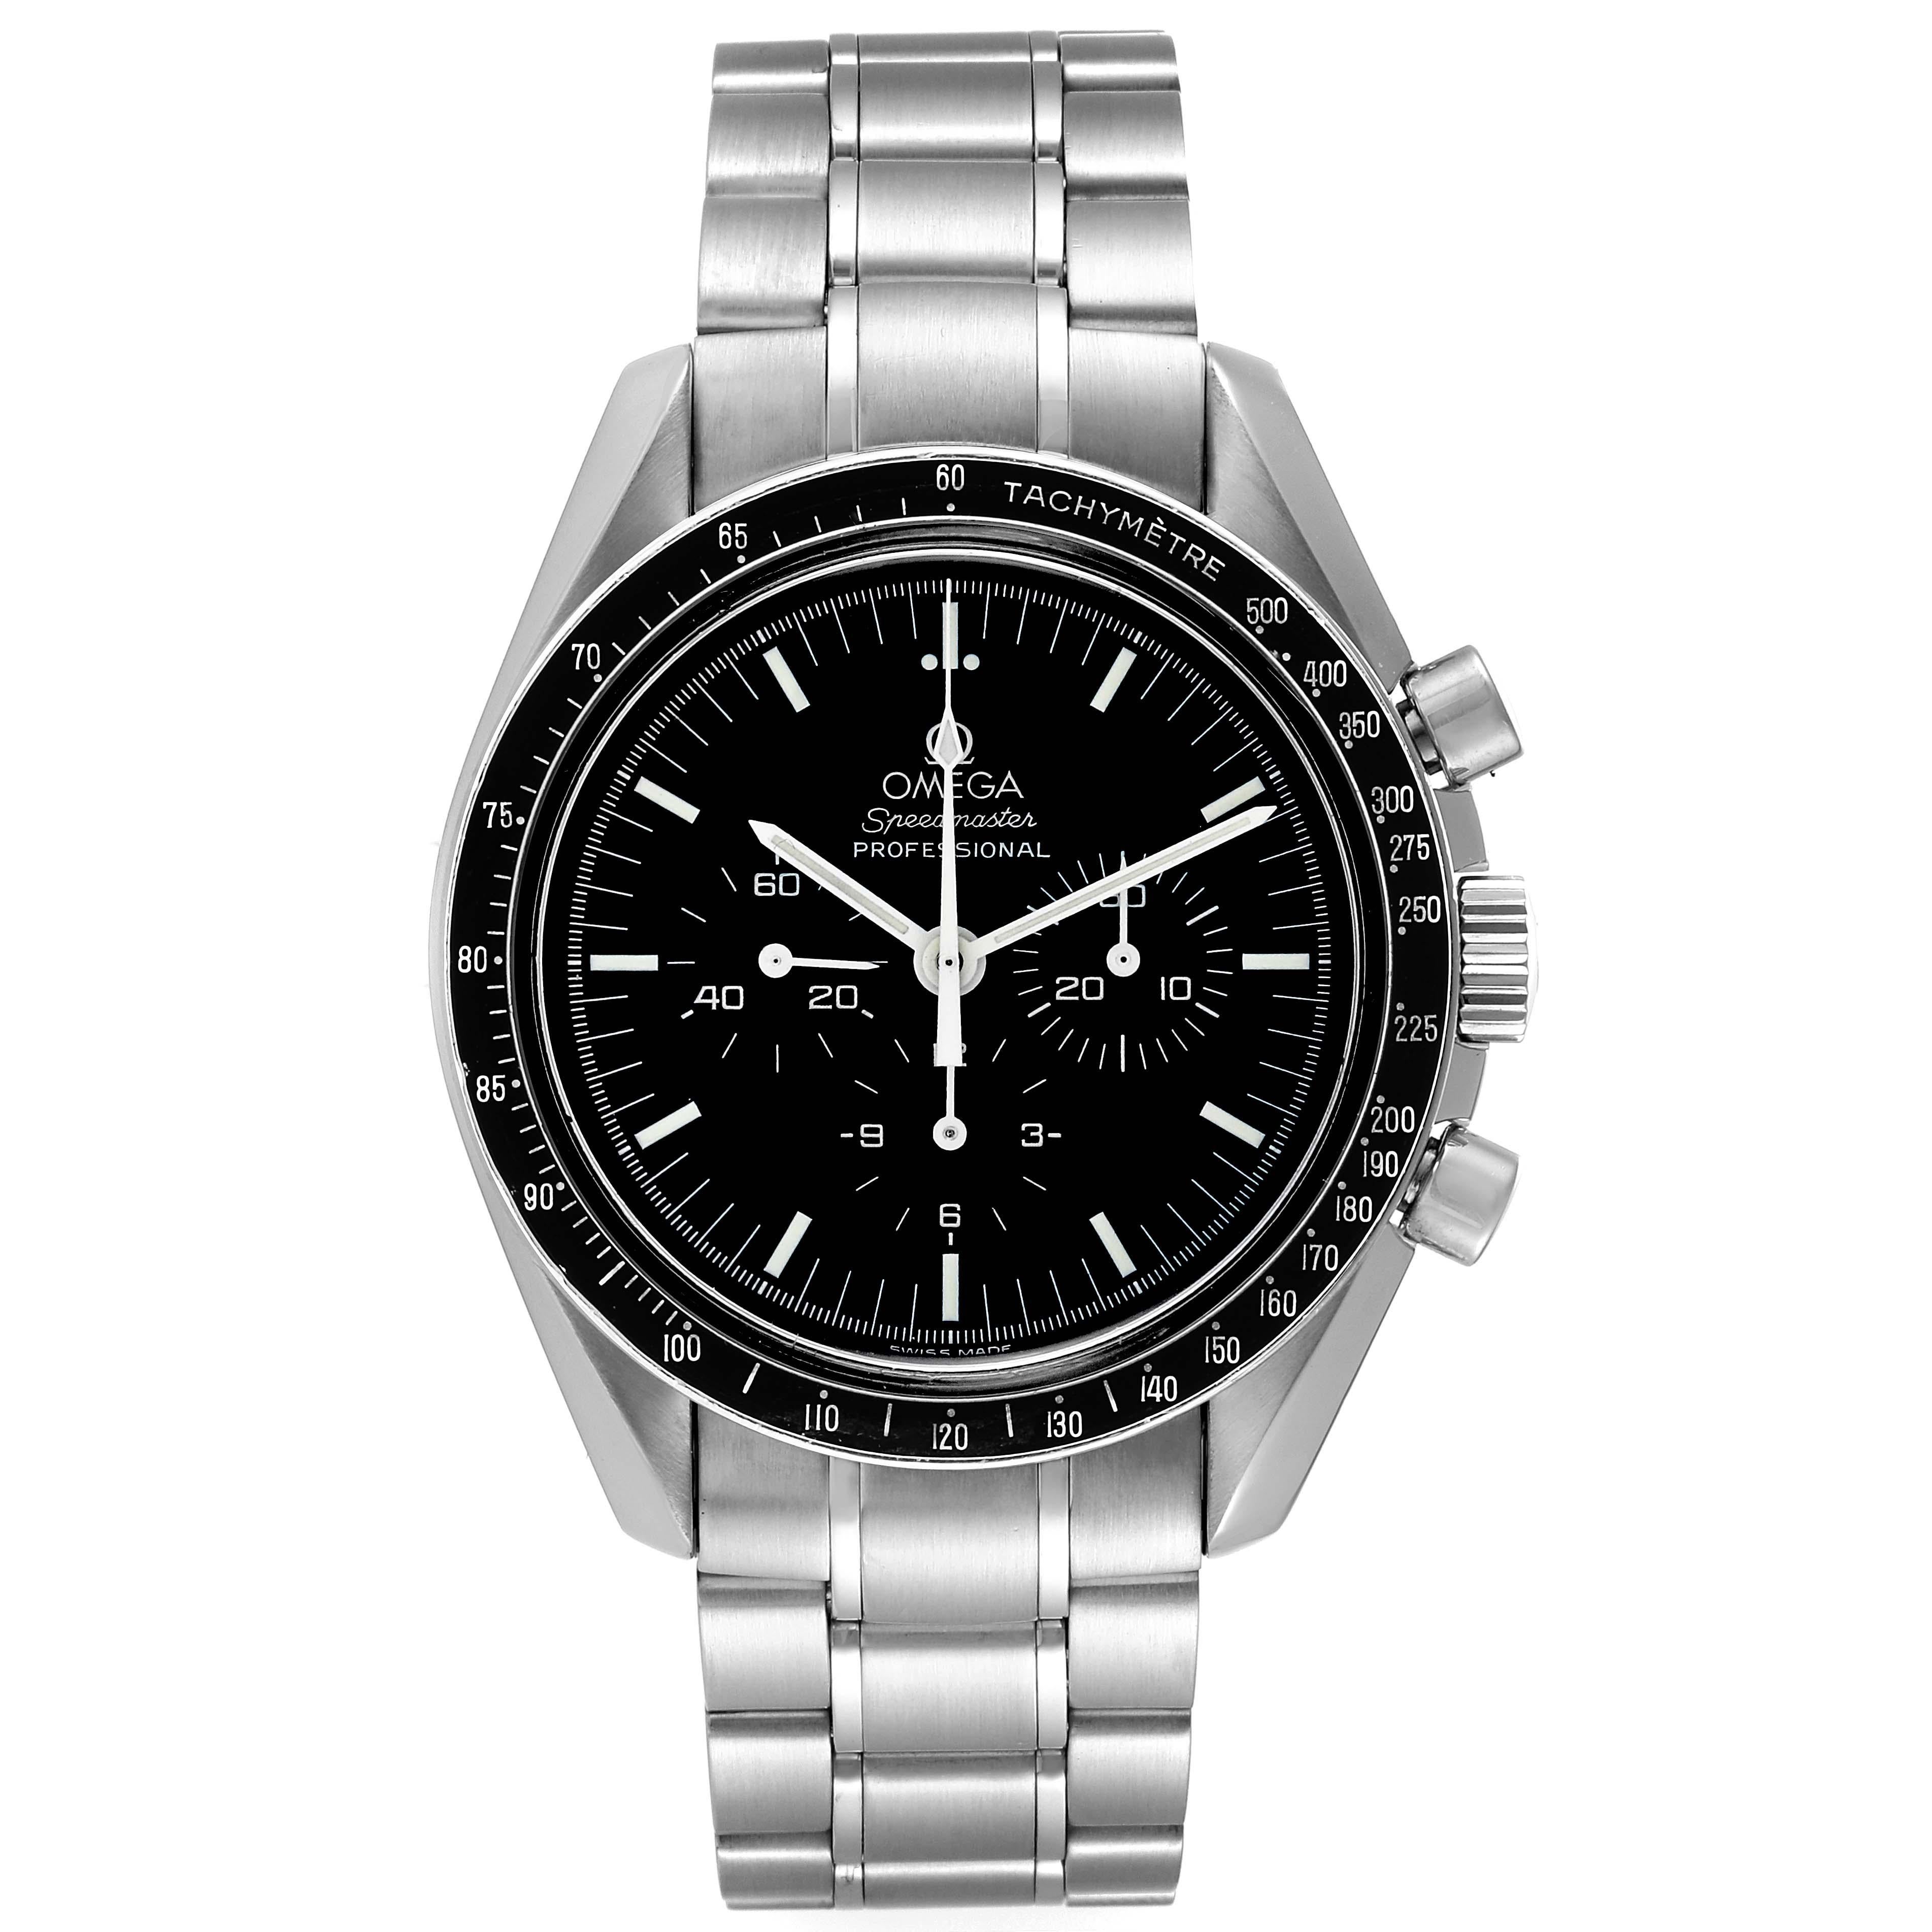 Omega Speedmaster Moonwatch Hesalite Sapphire Steel Mens Watch 3572.50.00. Manual winding chronograph movement. Caliber 1863. Stainless steel round case 42.0 mm in diameter. Exhibition transparent sapphire crystal caseback. Stainless steel bezel